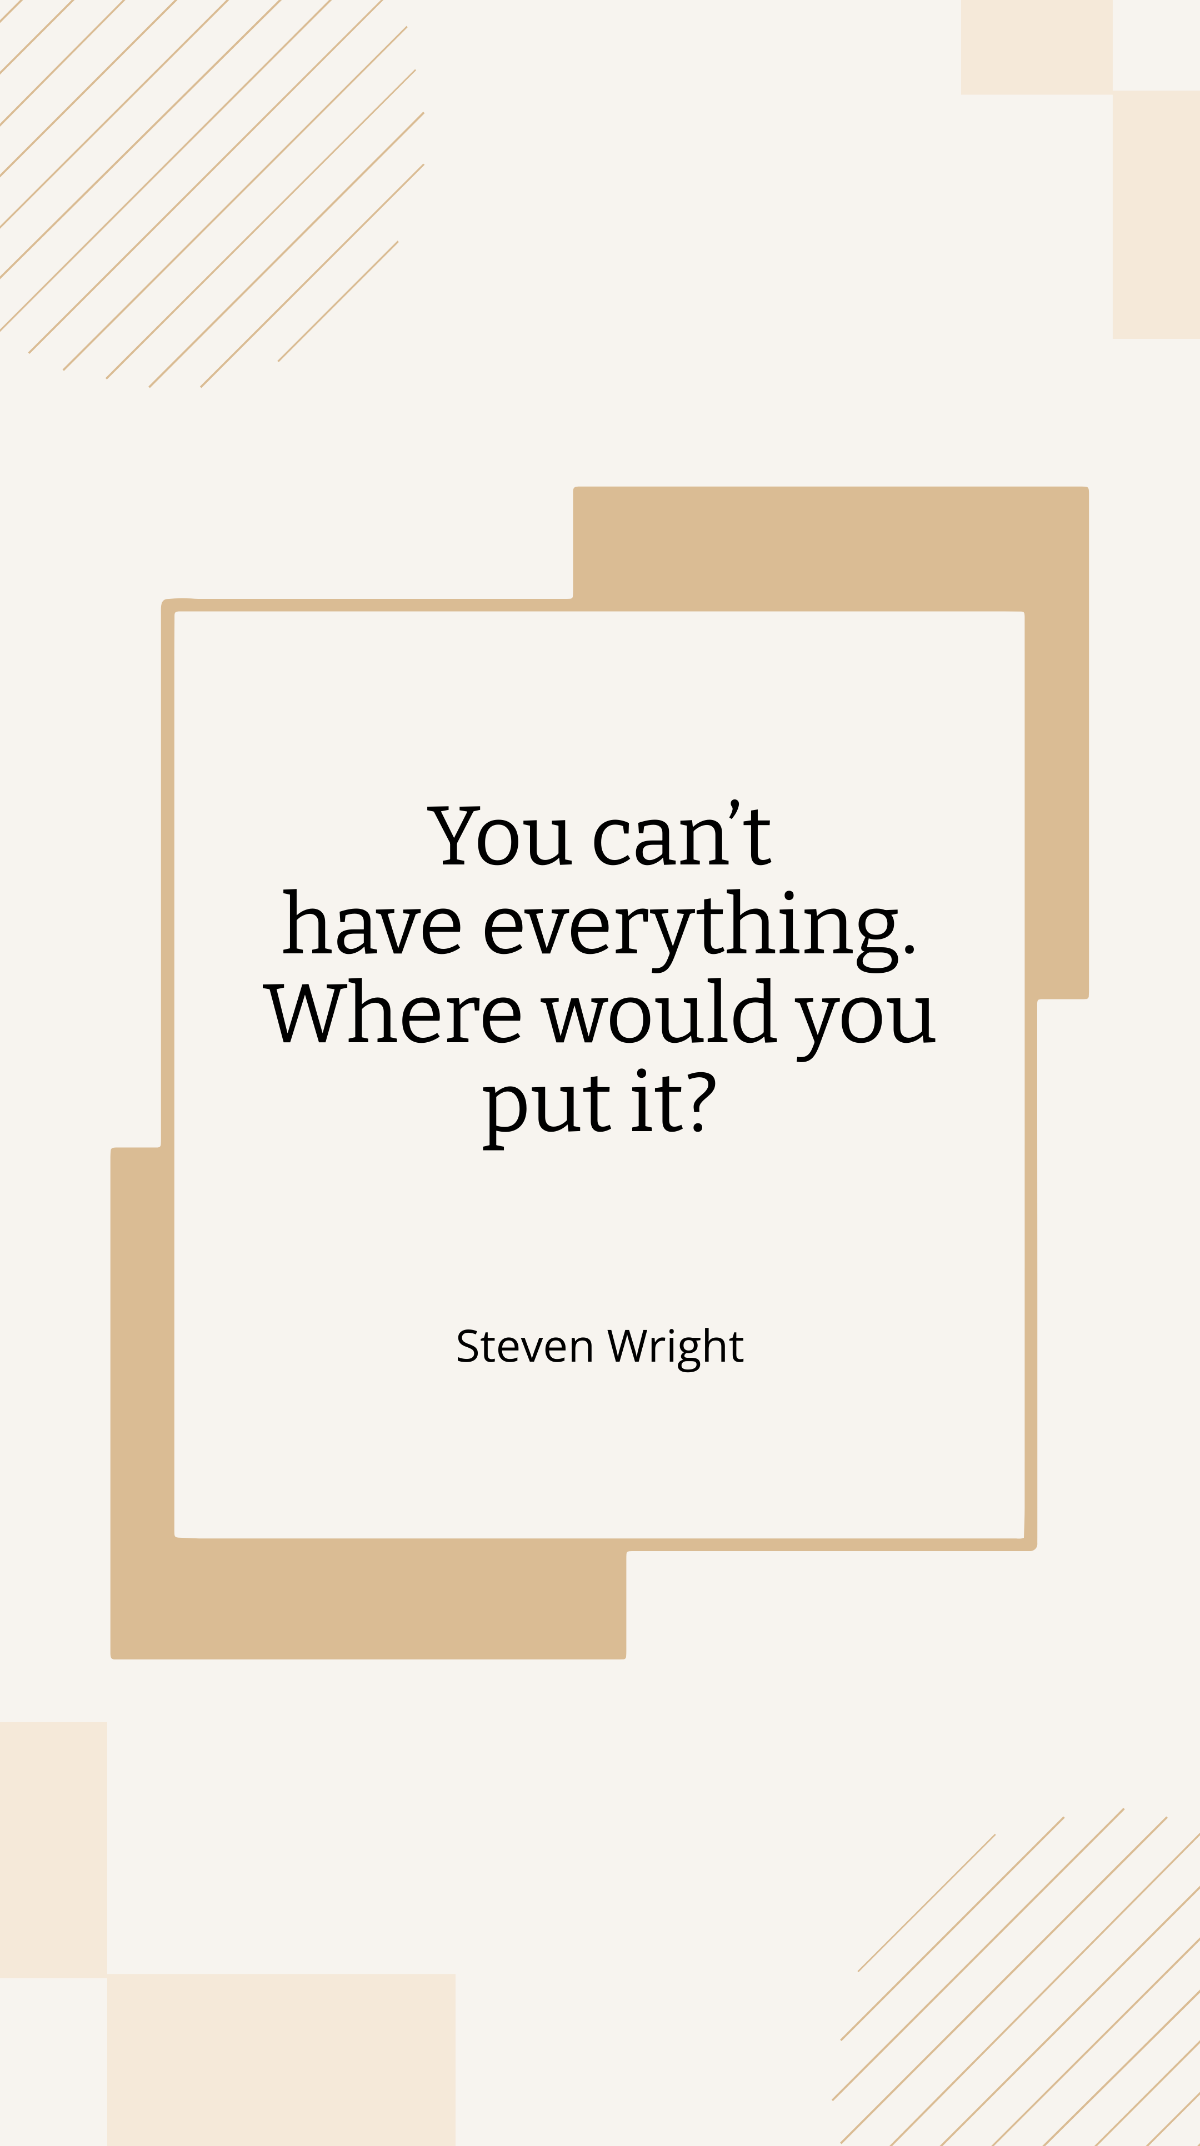 Steven Wright - “You can’t have everything. Where would you put it?” Template